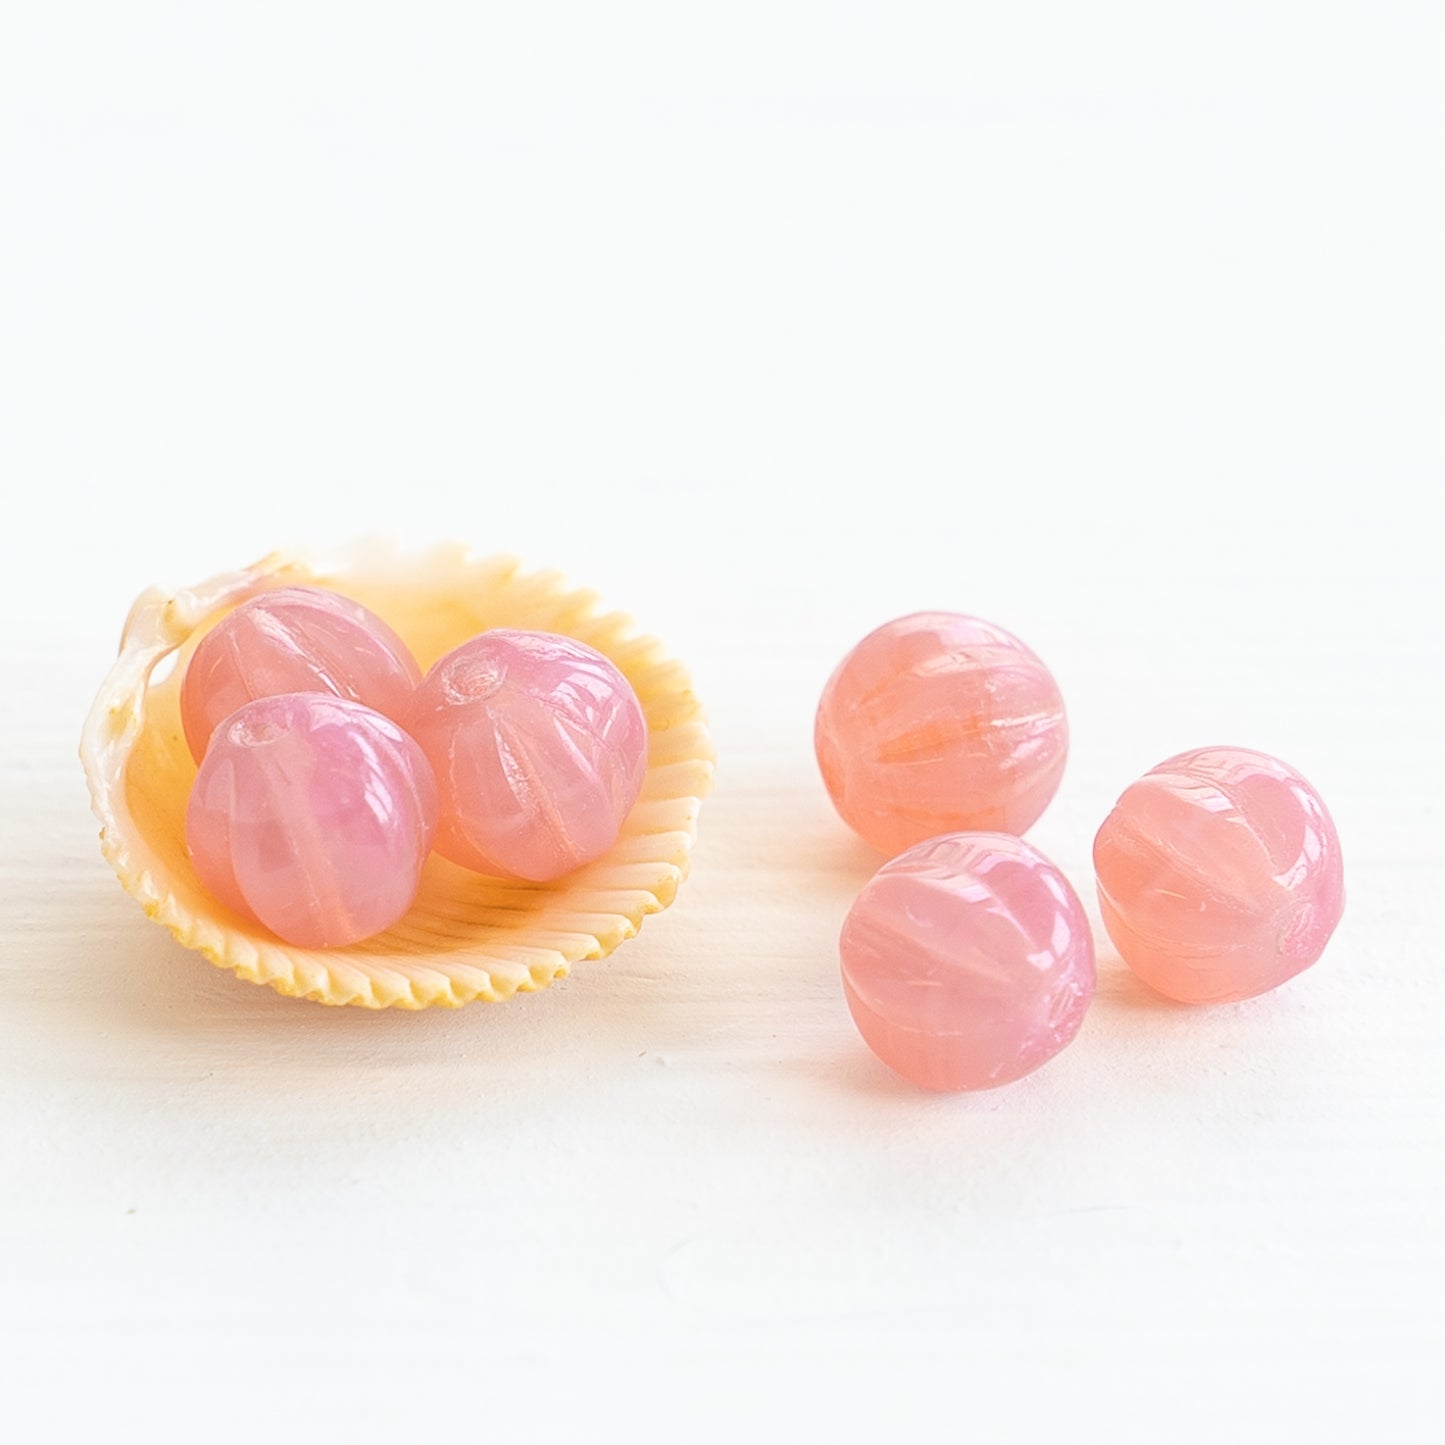 Load image into Gallery viewer, 6mm Glass Melon Beads - Opaline Pink Rose - 40 Beads
